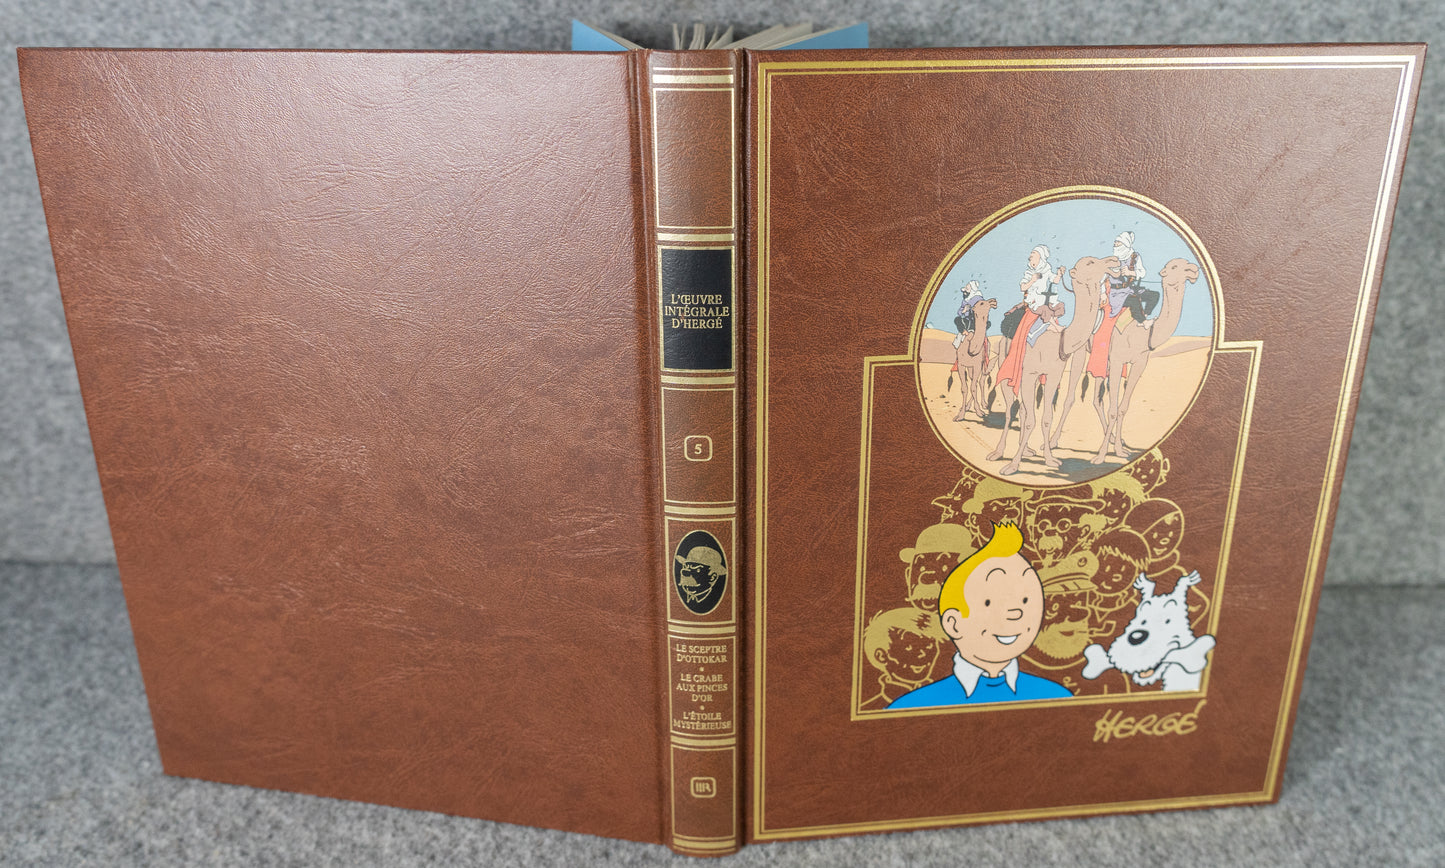 Rombaldi Tintin Volume 5 - King Ottokar's Sceptre, The Crab with the Golden Claws, The Shooting Star + Q&F - 1st Edition 1985 Herge EO